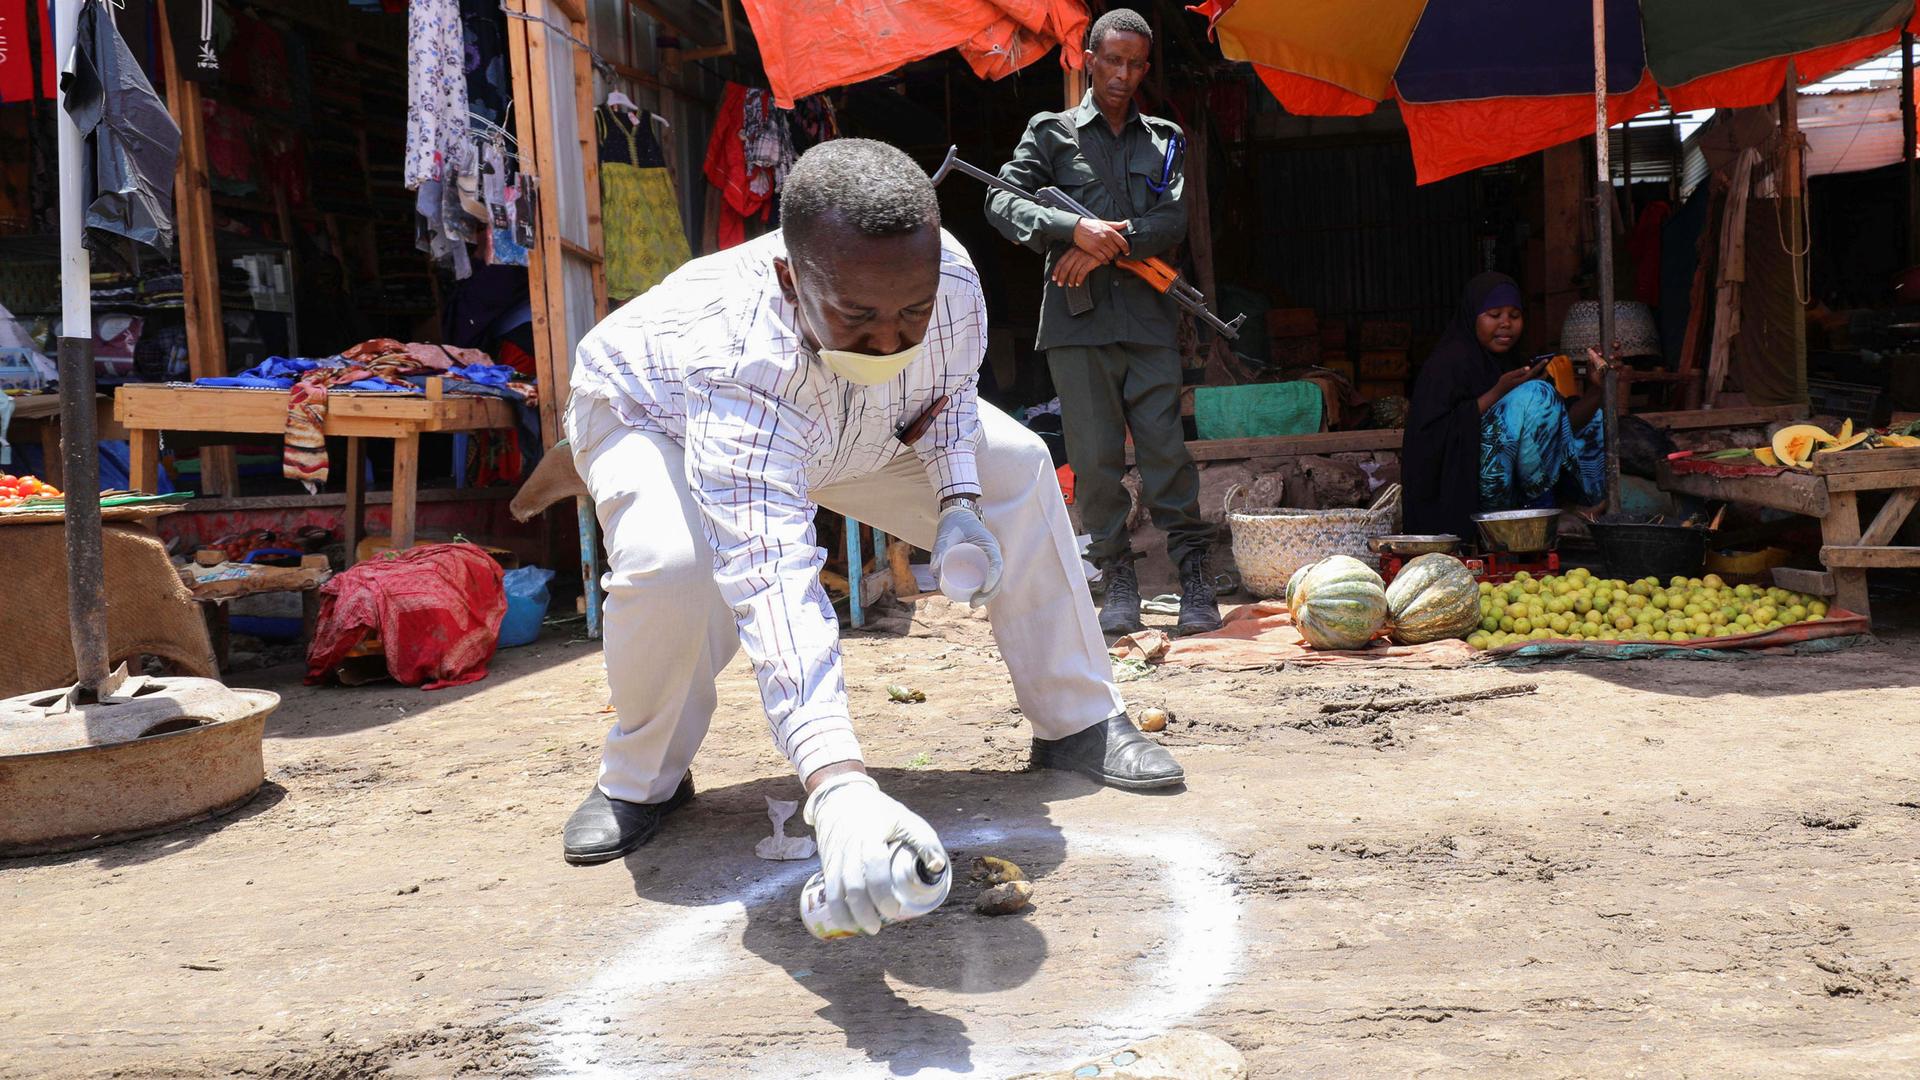 A man is shown bent over and spaying a white circle on the ground with a man nearby holding a weapon.